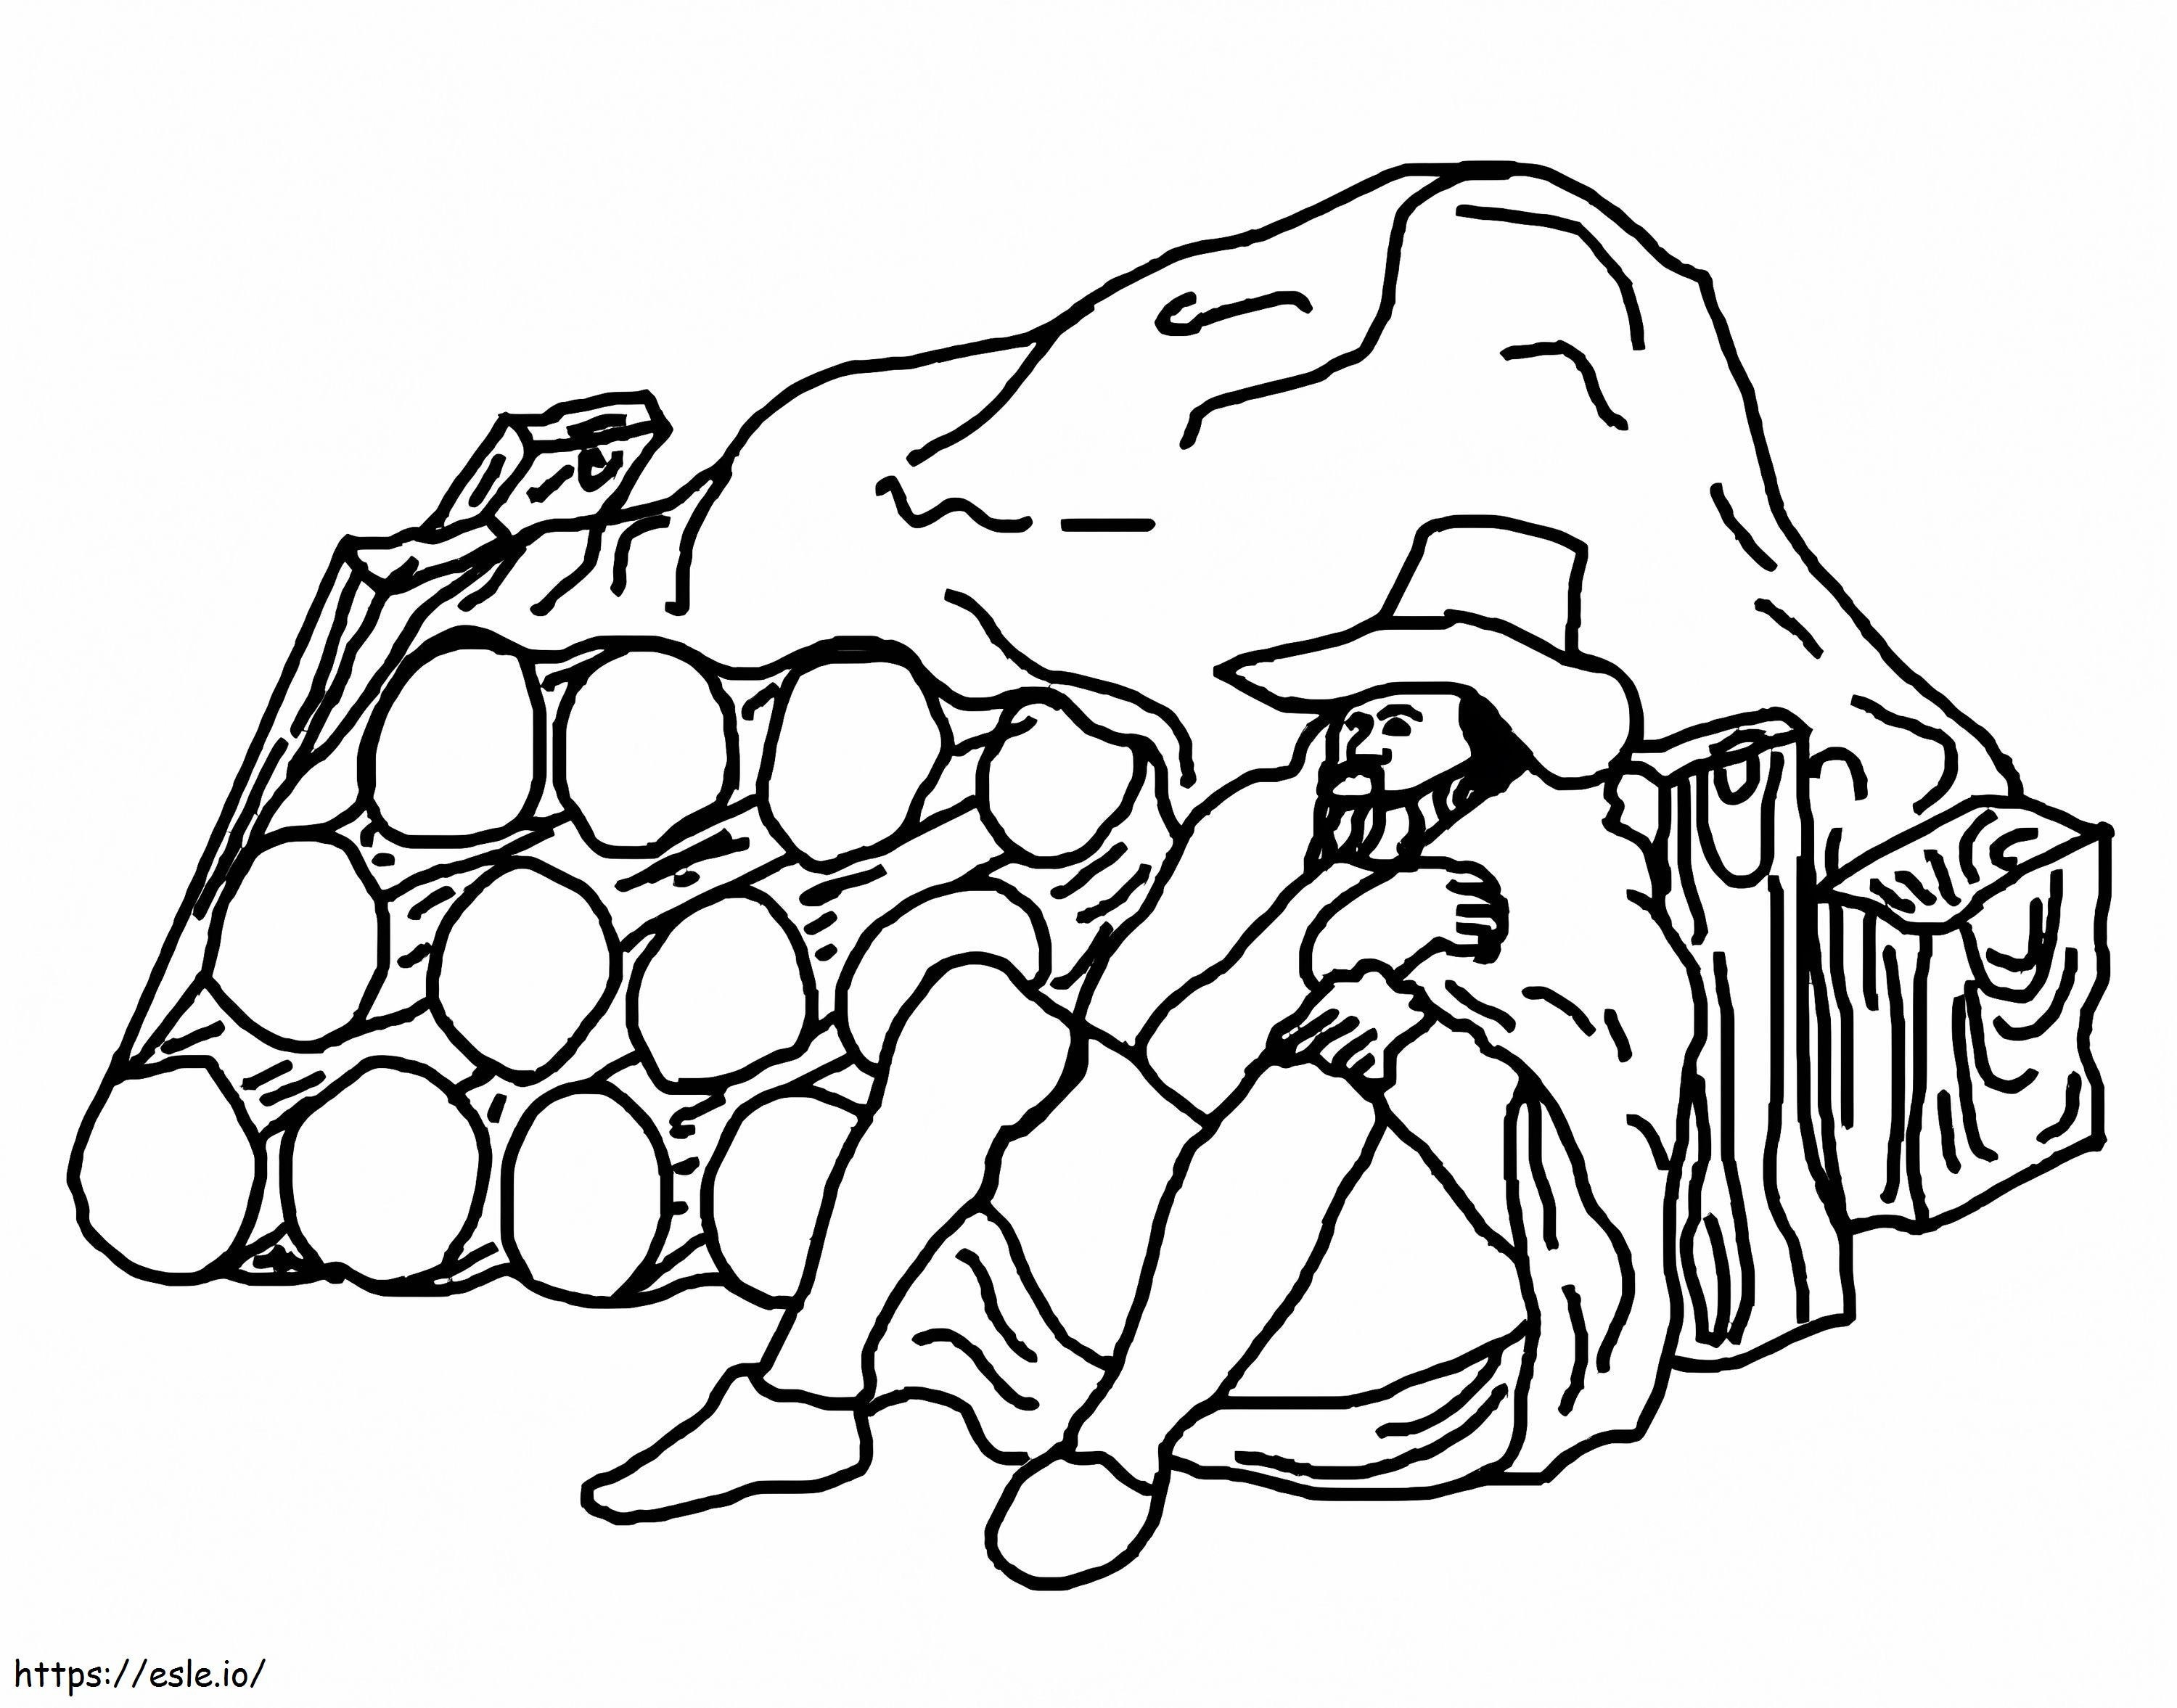 Guy Fawkes 3 coloring page